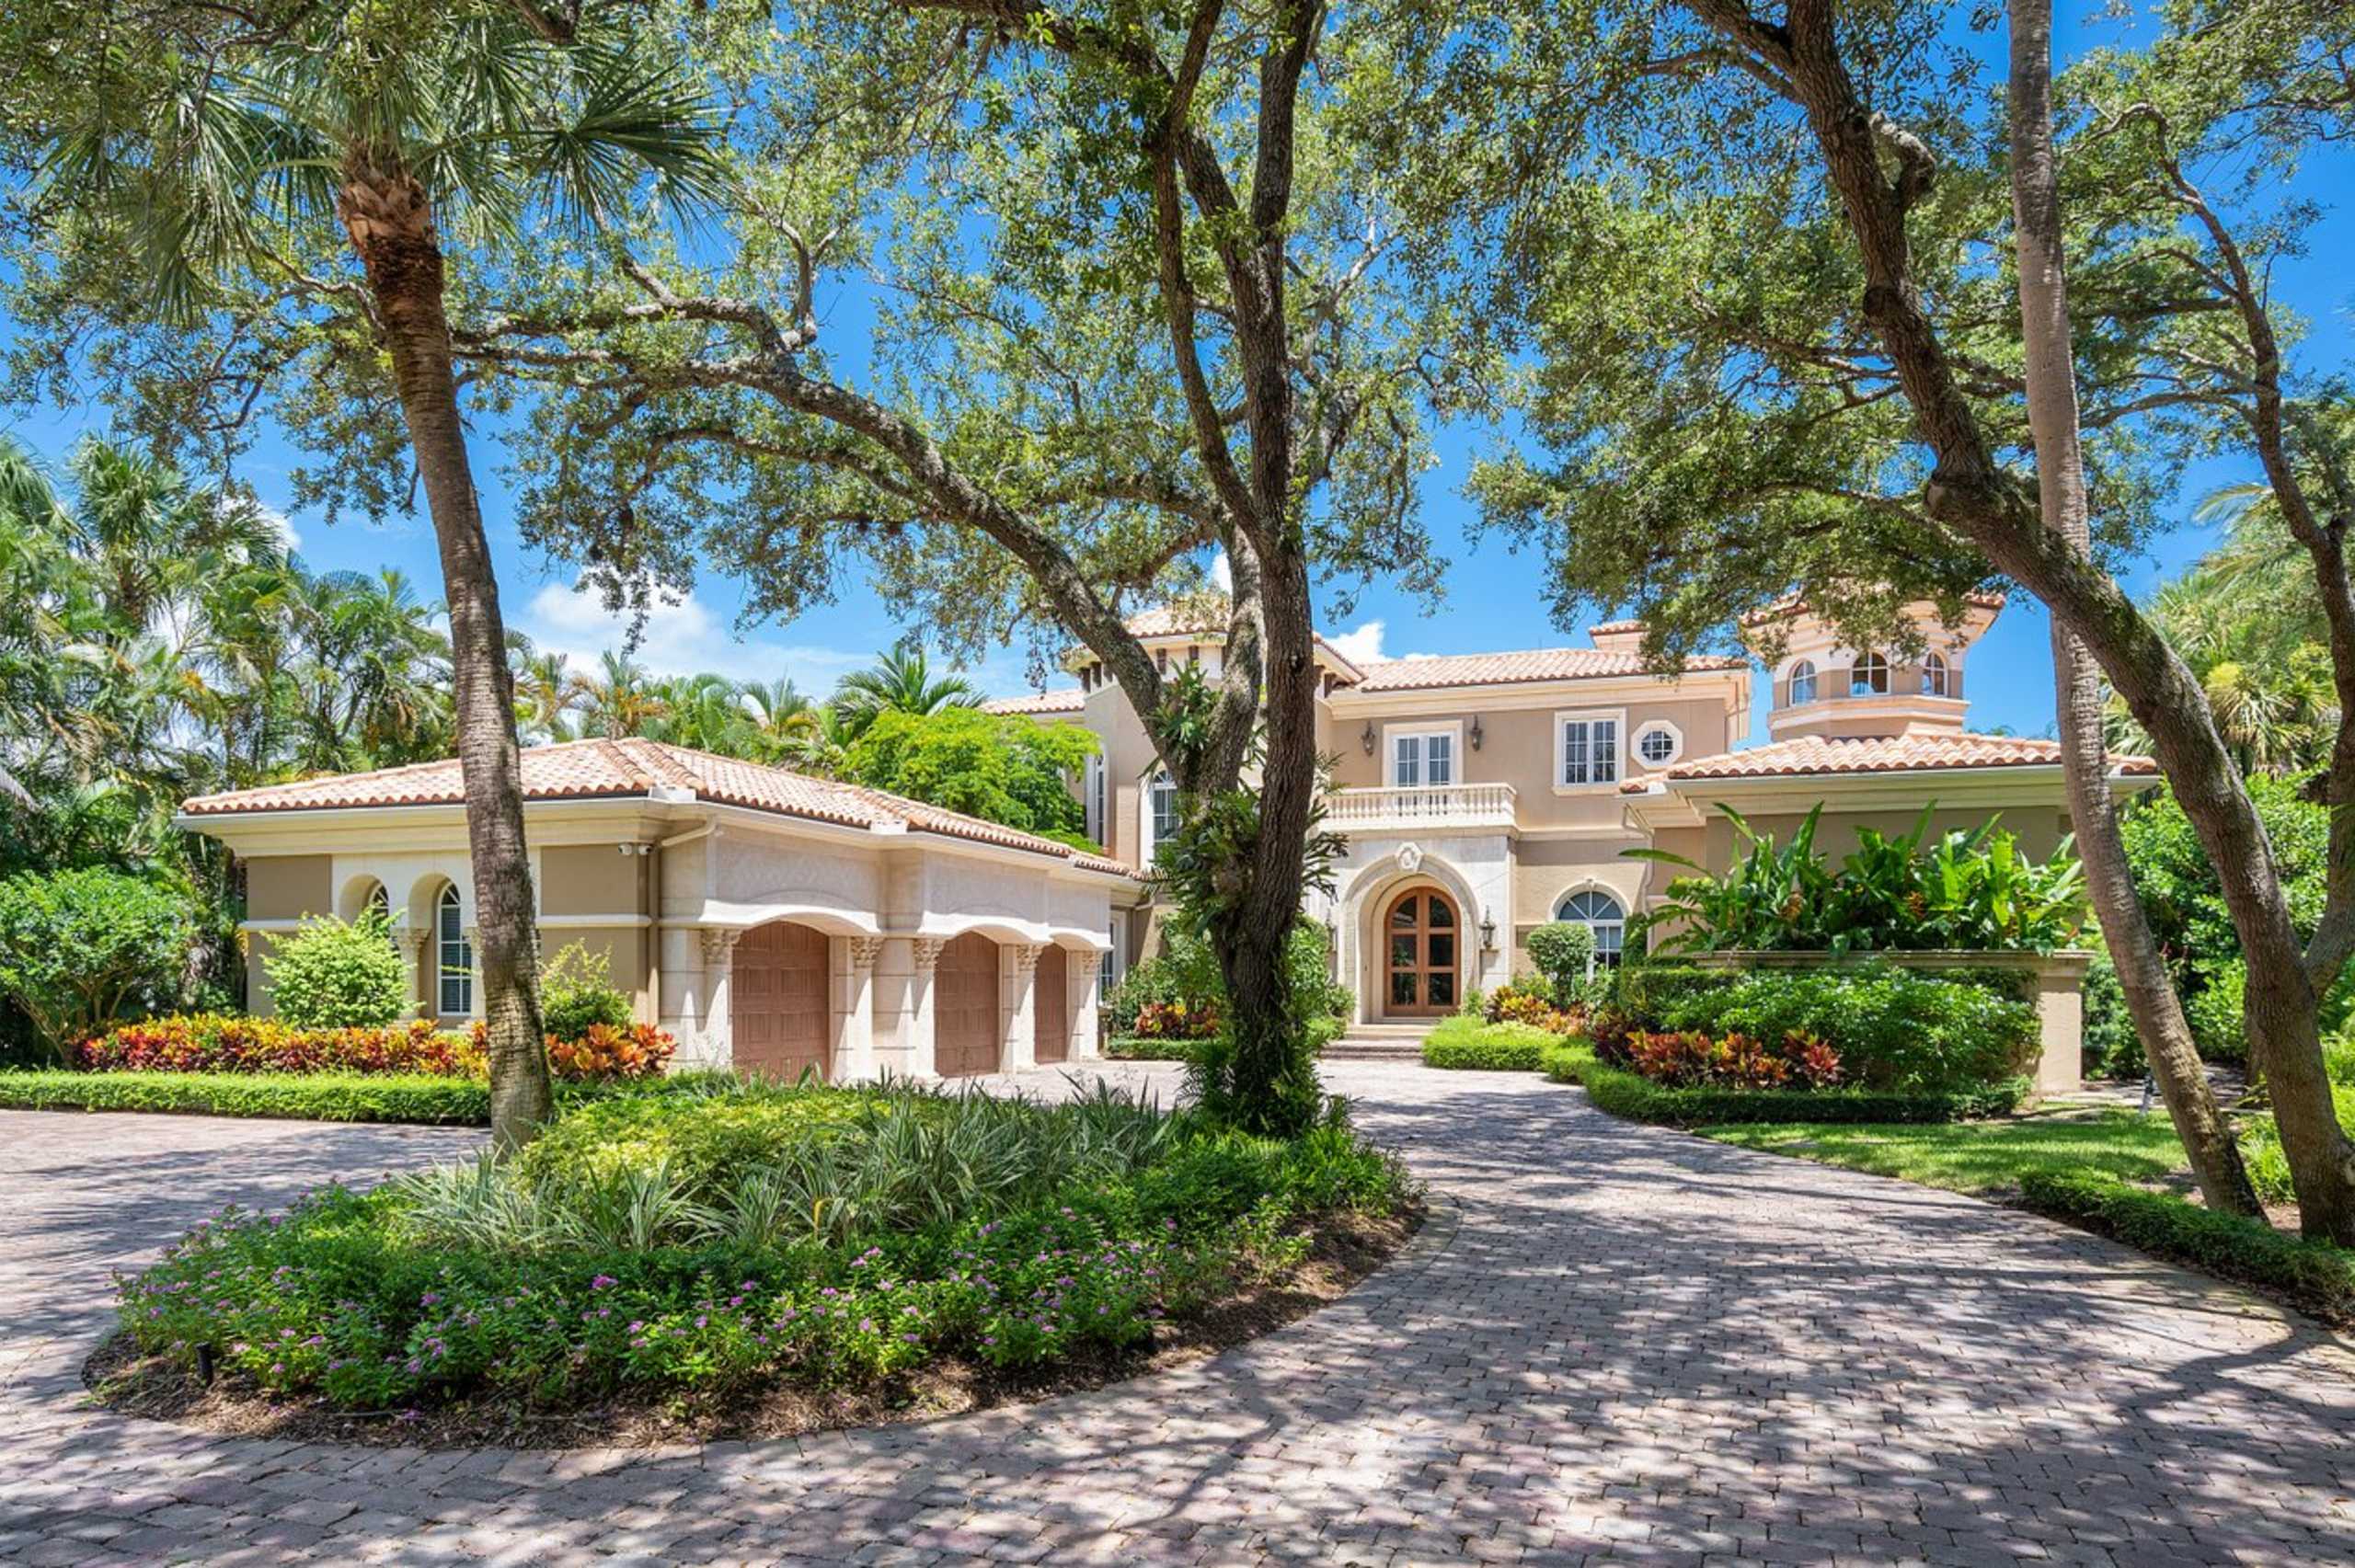 JUST LISTED!!! $9,350,000.00 Click for video